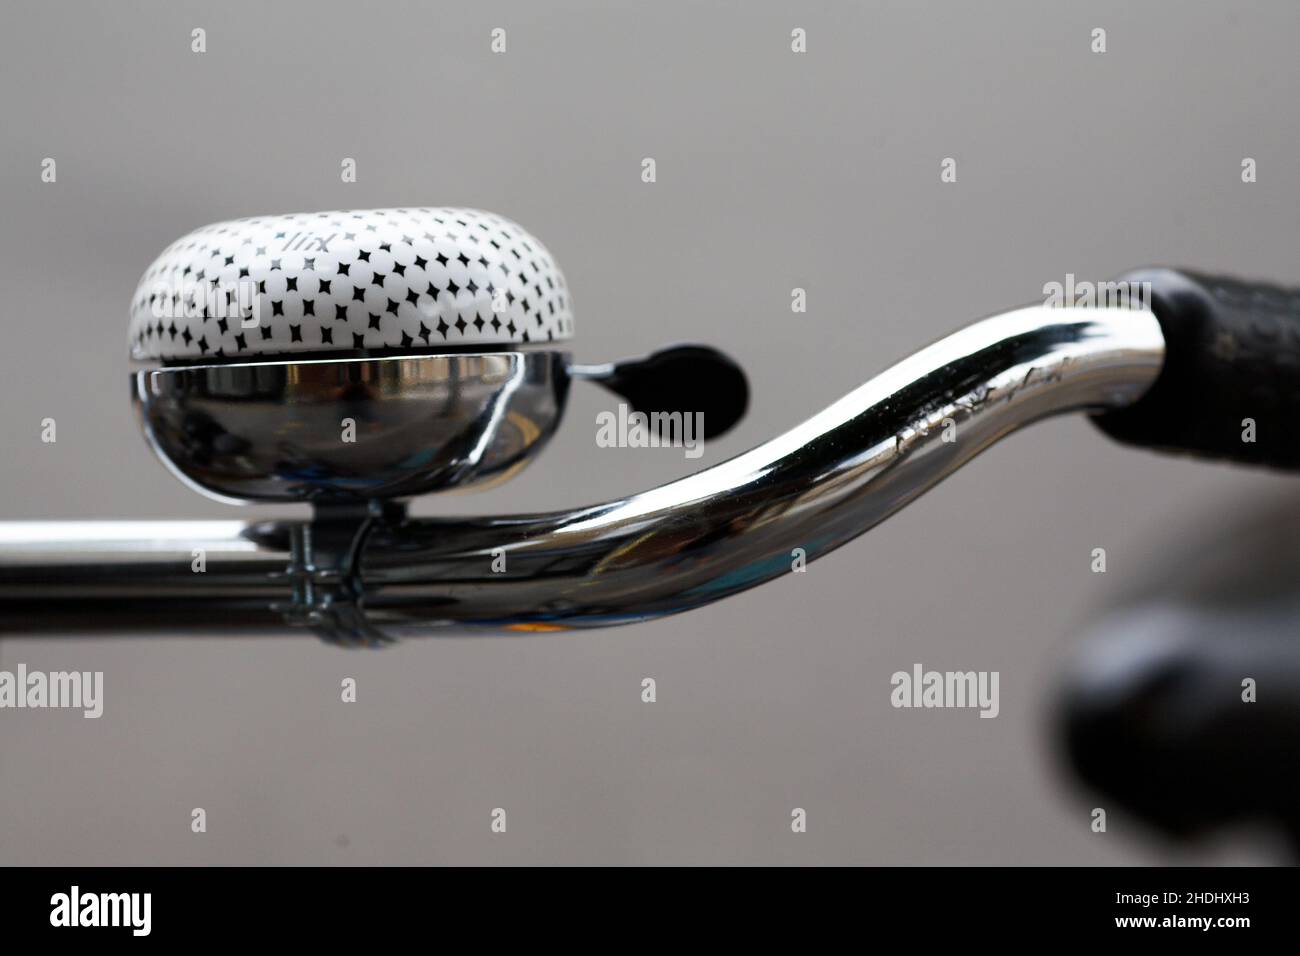 Polkadot bicycle bell . Bicycle handlebar with bell with blurred background. Stock Photo